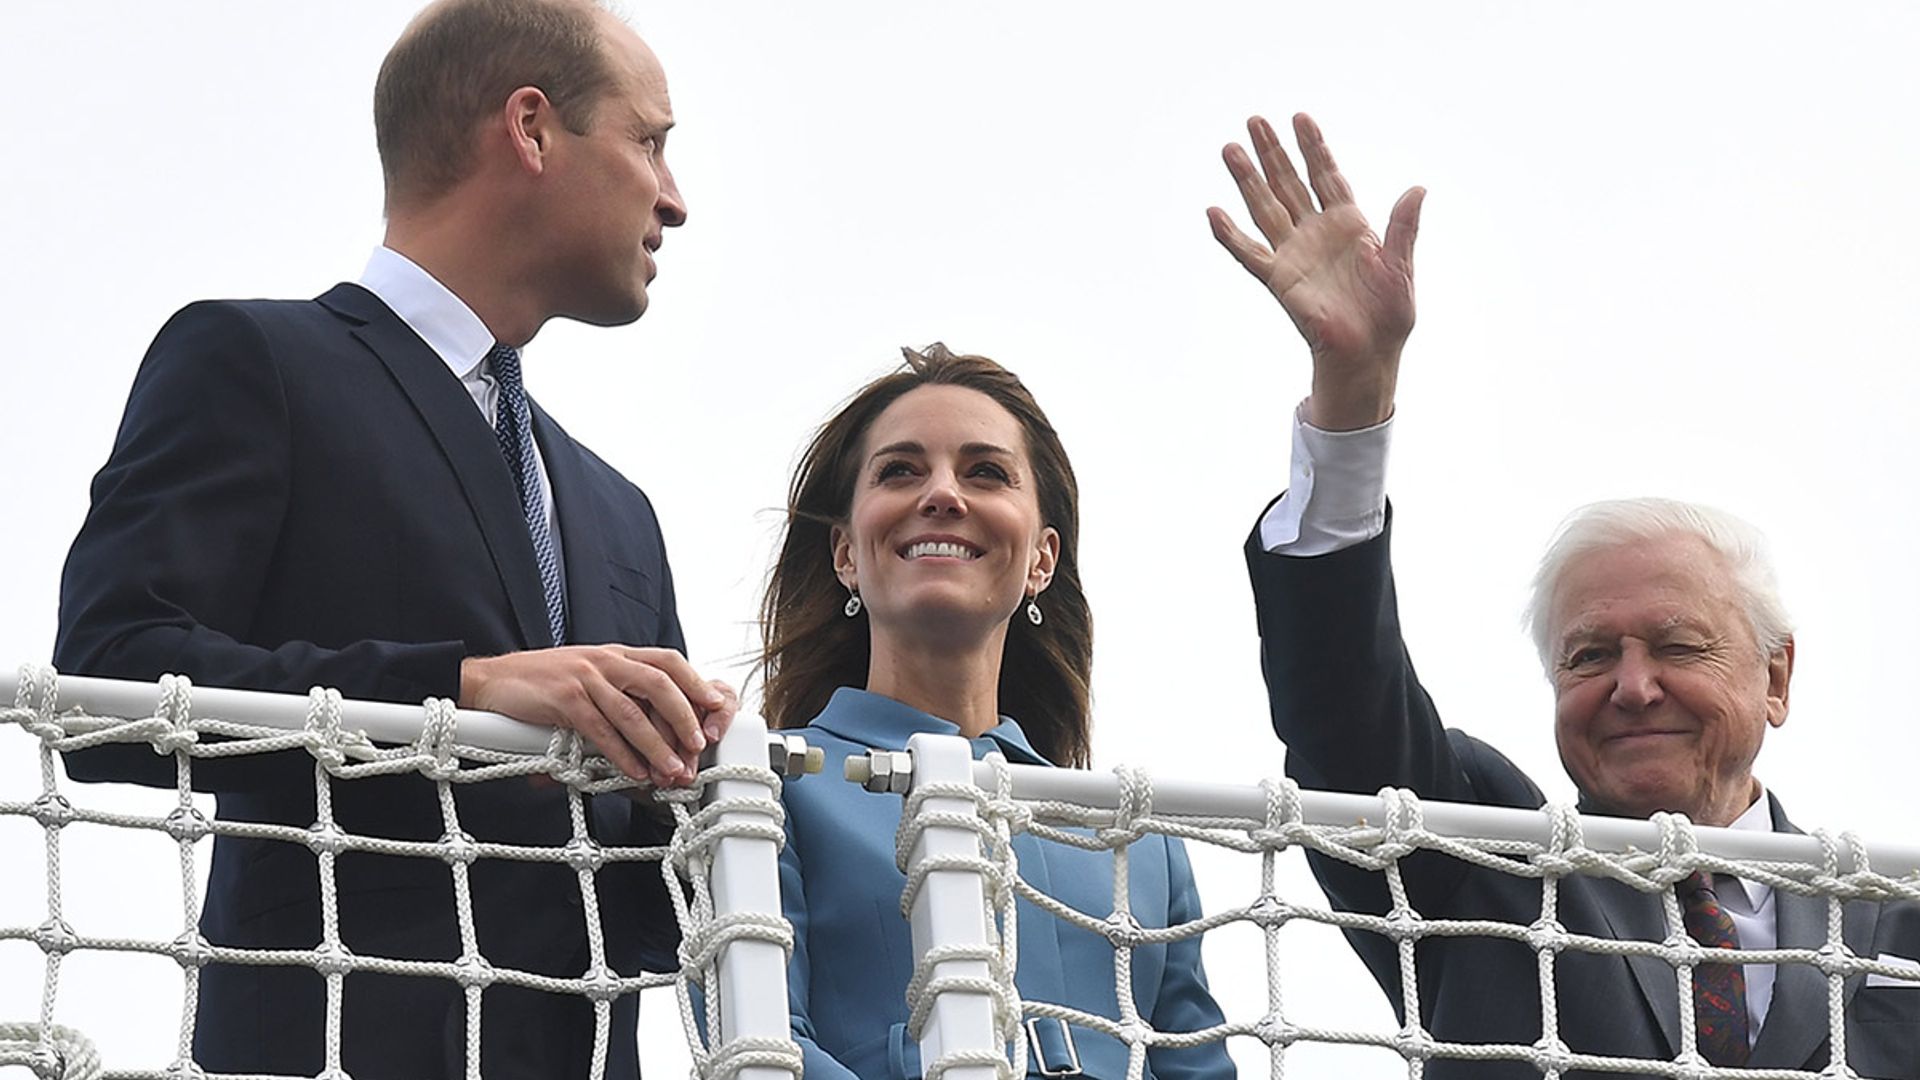 Kate Middleton and Prince William visit Birkenhead for first joint engagement this autumn - best photos